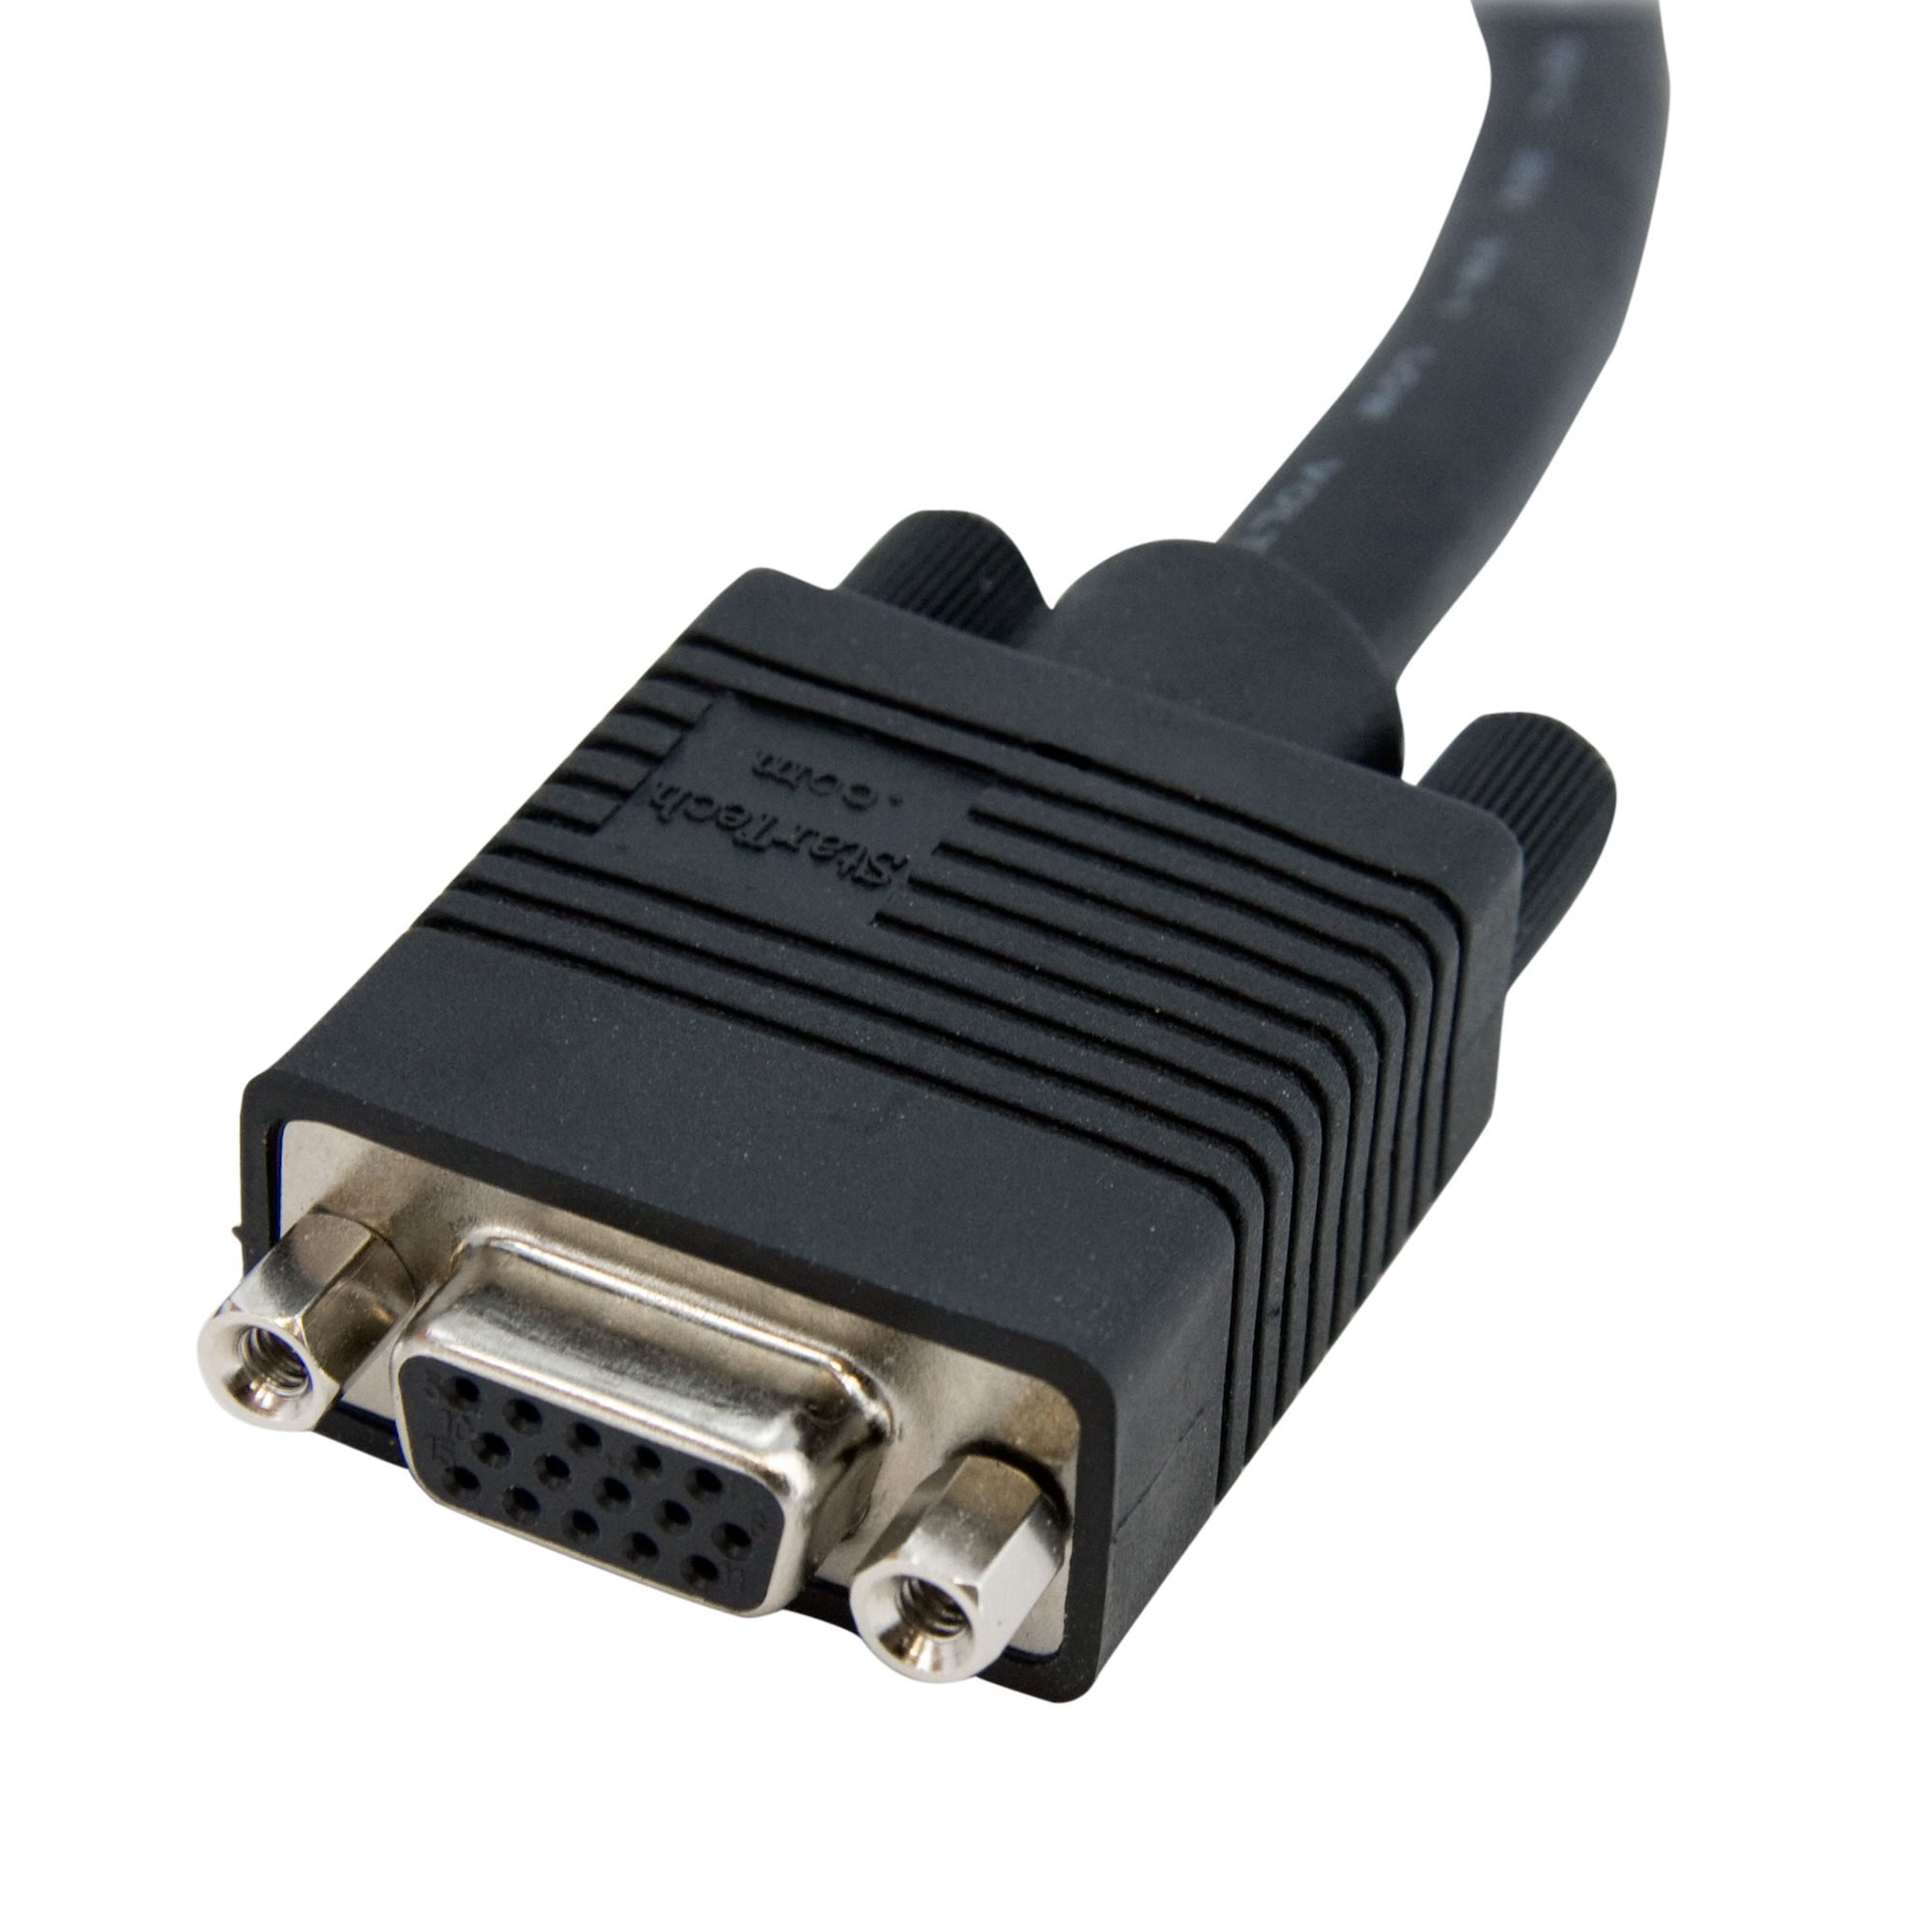 VGA Monitor Extension Cable StarTech.com MXT101 6 ft HD15 M/F 